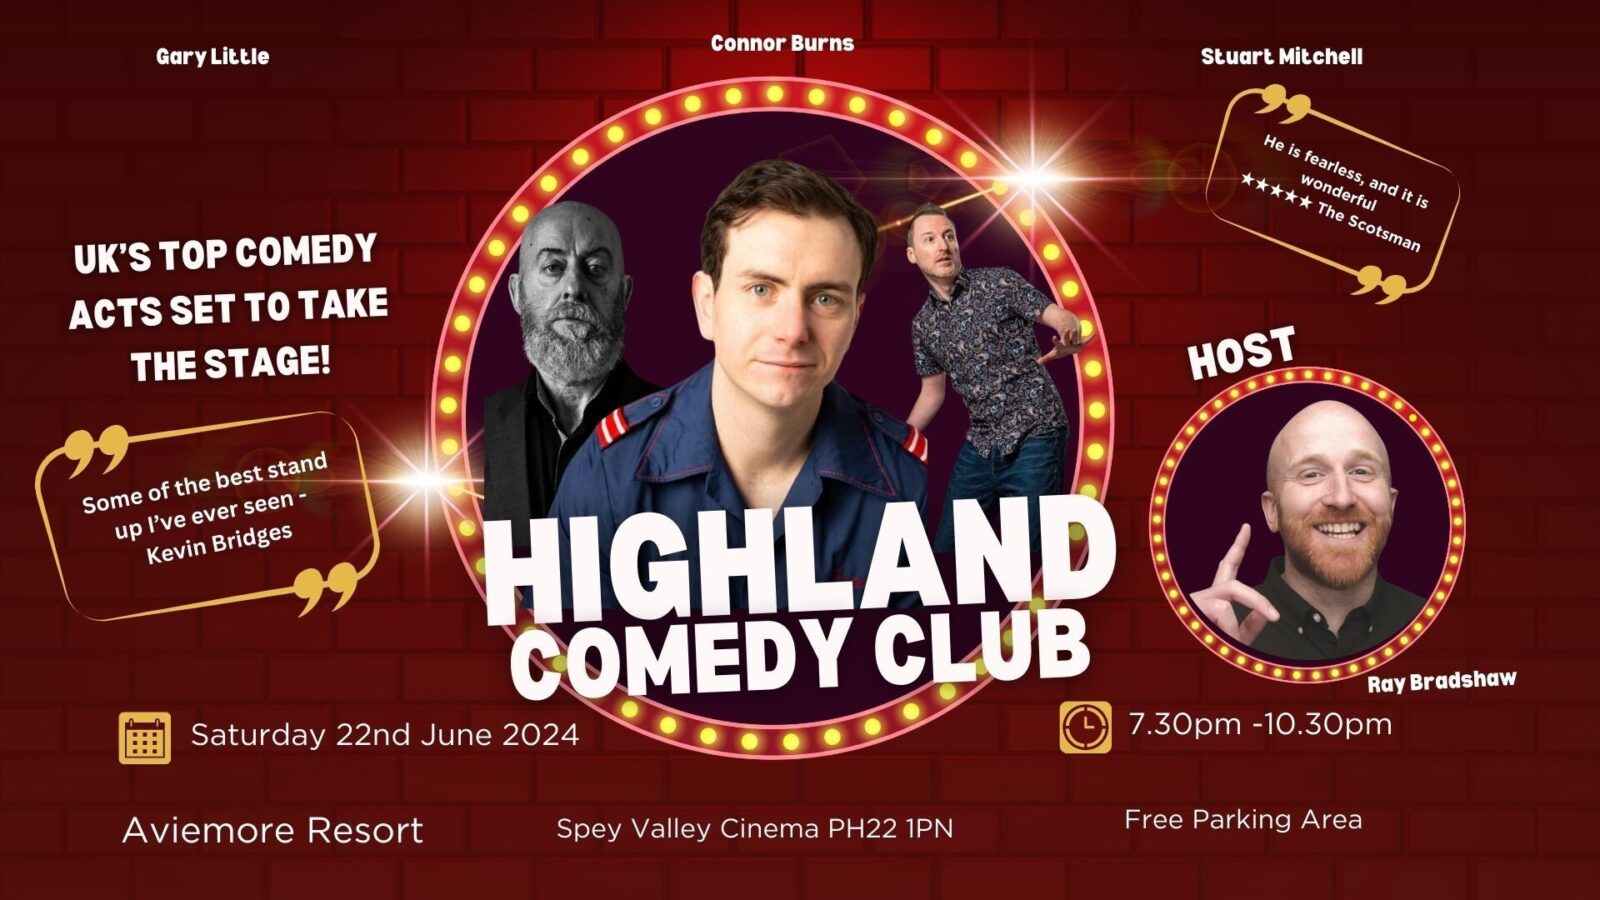 Ready for a laugh? The most anticipated comedy night comes to the Highlands